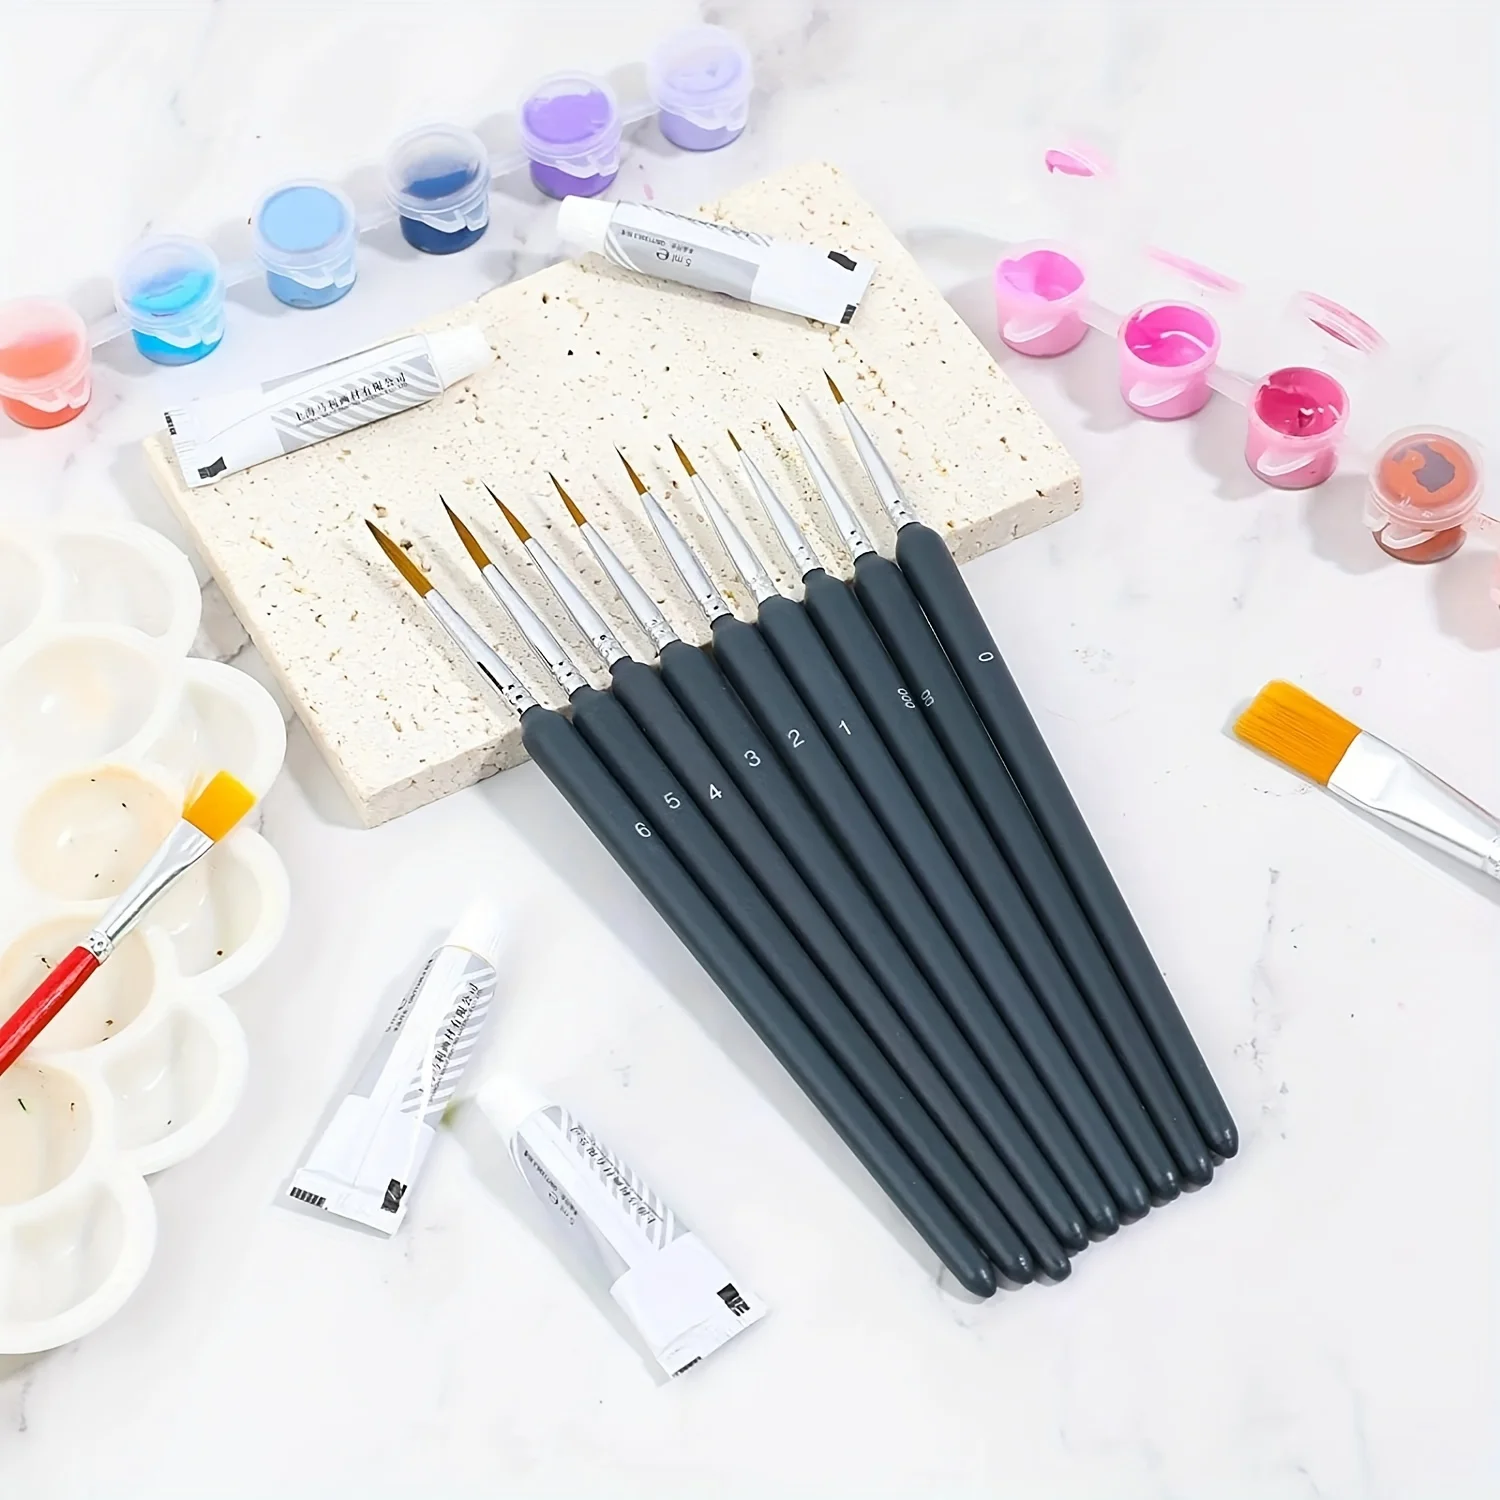 11 Pcs Miniature Detail art Paint Brush Set with Wood Handle Painting  Supplies Outline Pen Watercolor Handmade Painting Tools - AliExpress